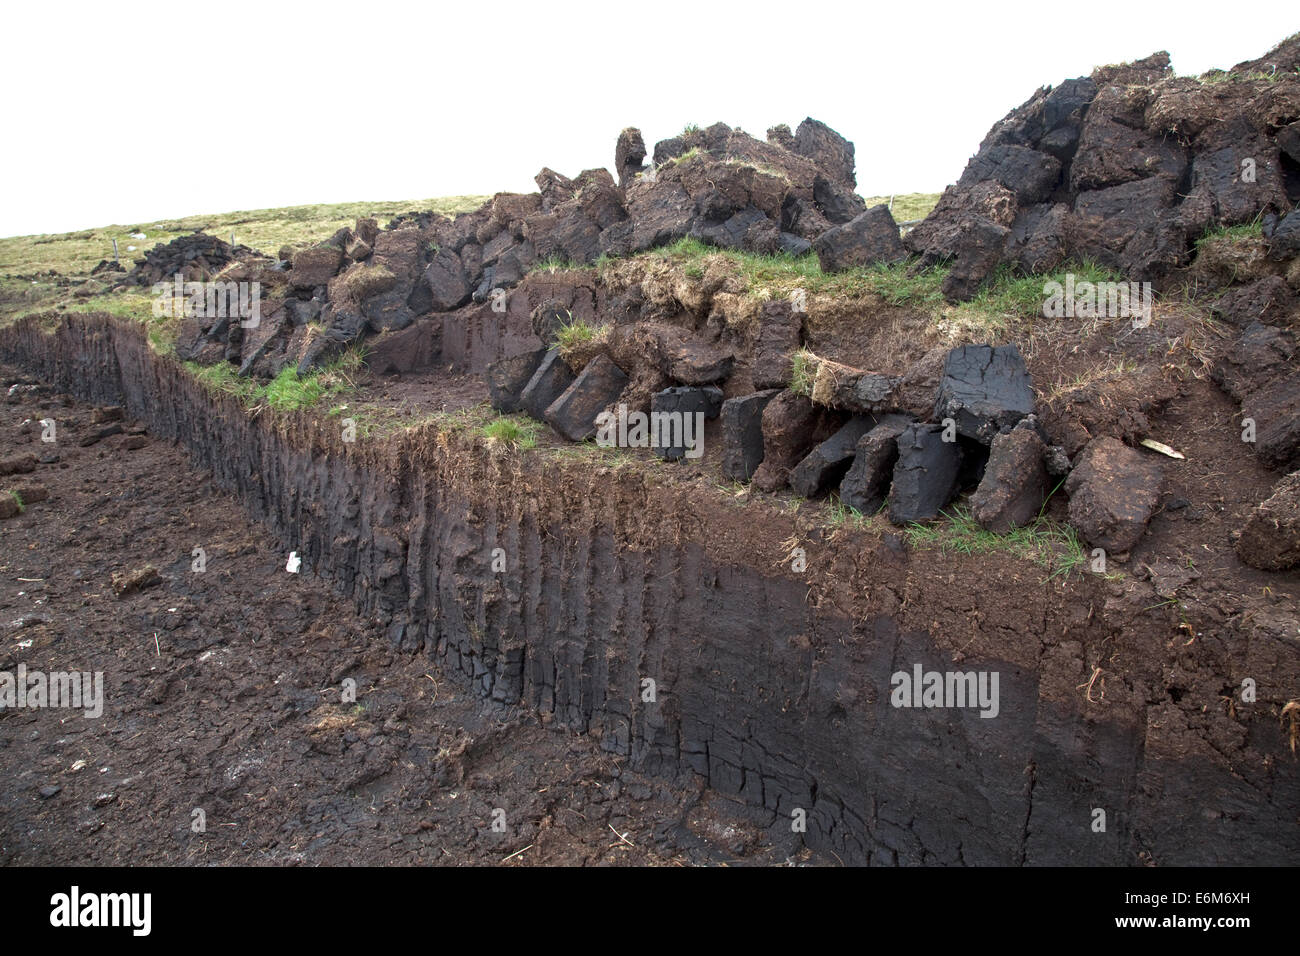 Peat cutting Isle of Lewis Outer Hebrides Scotland Stock Photo